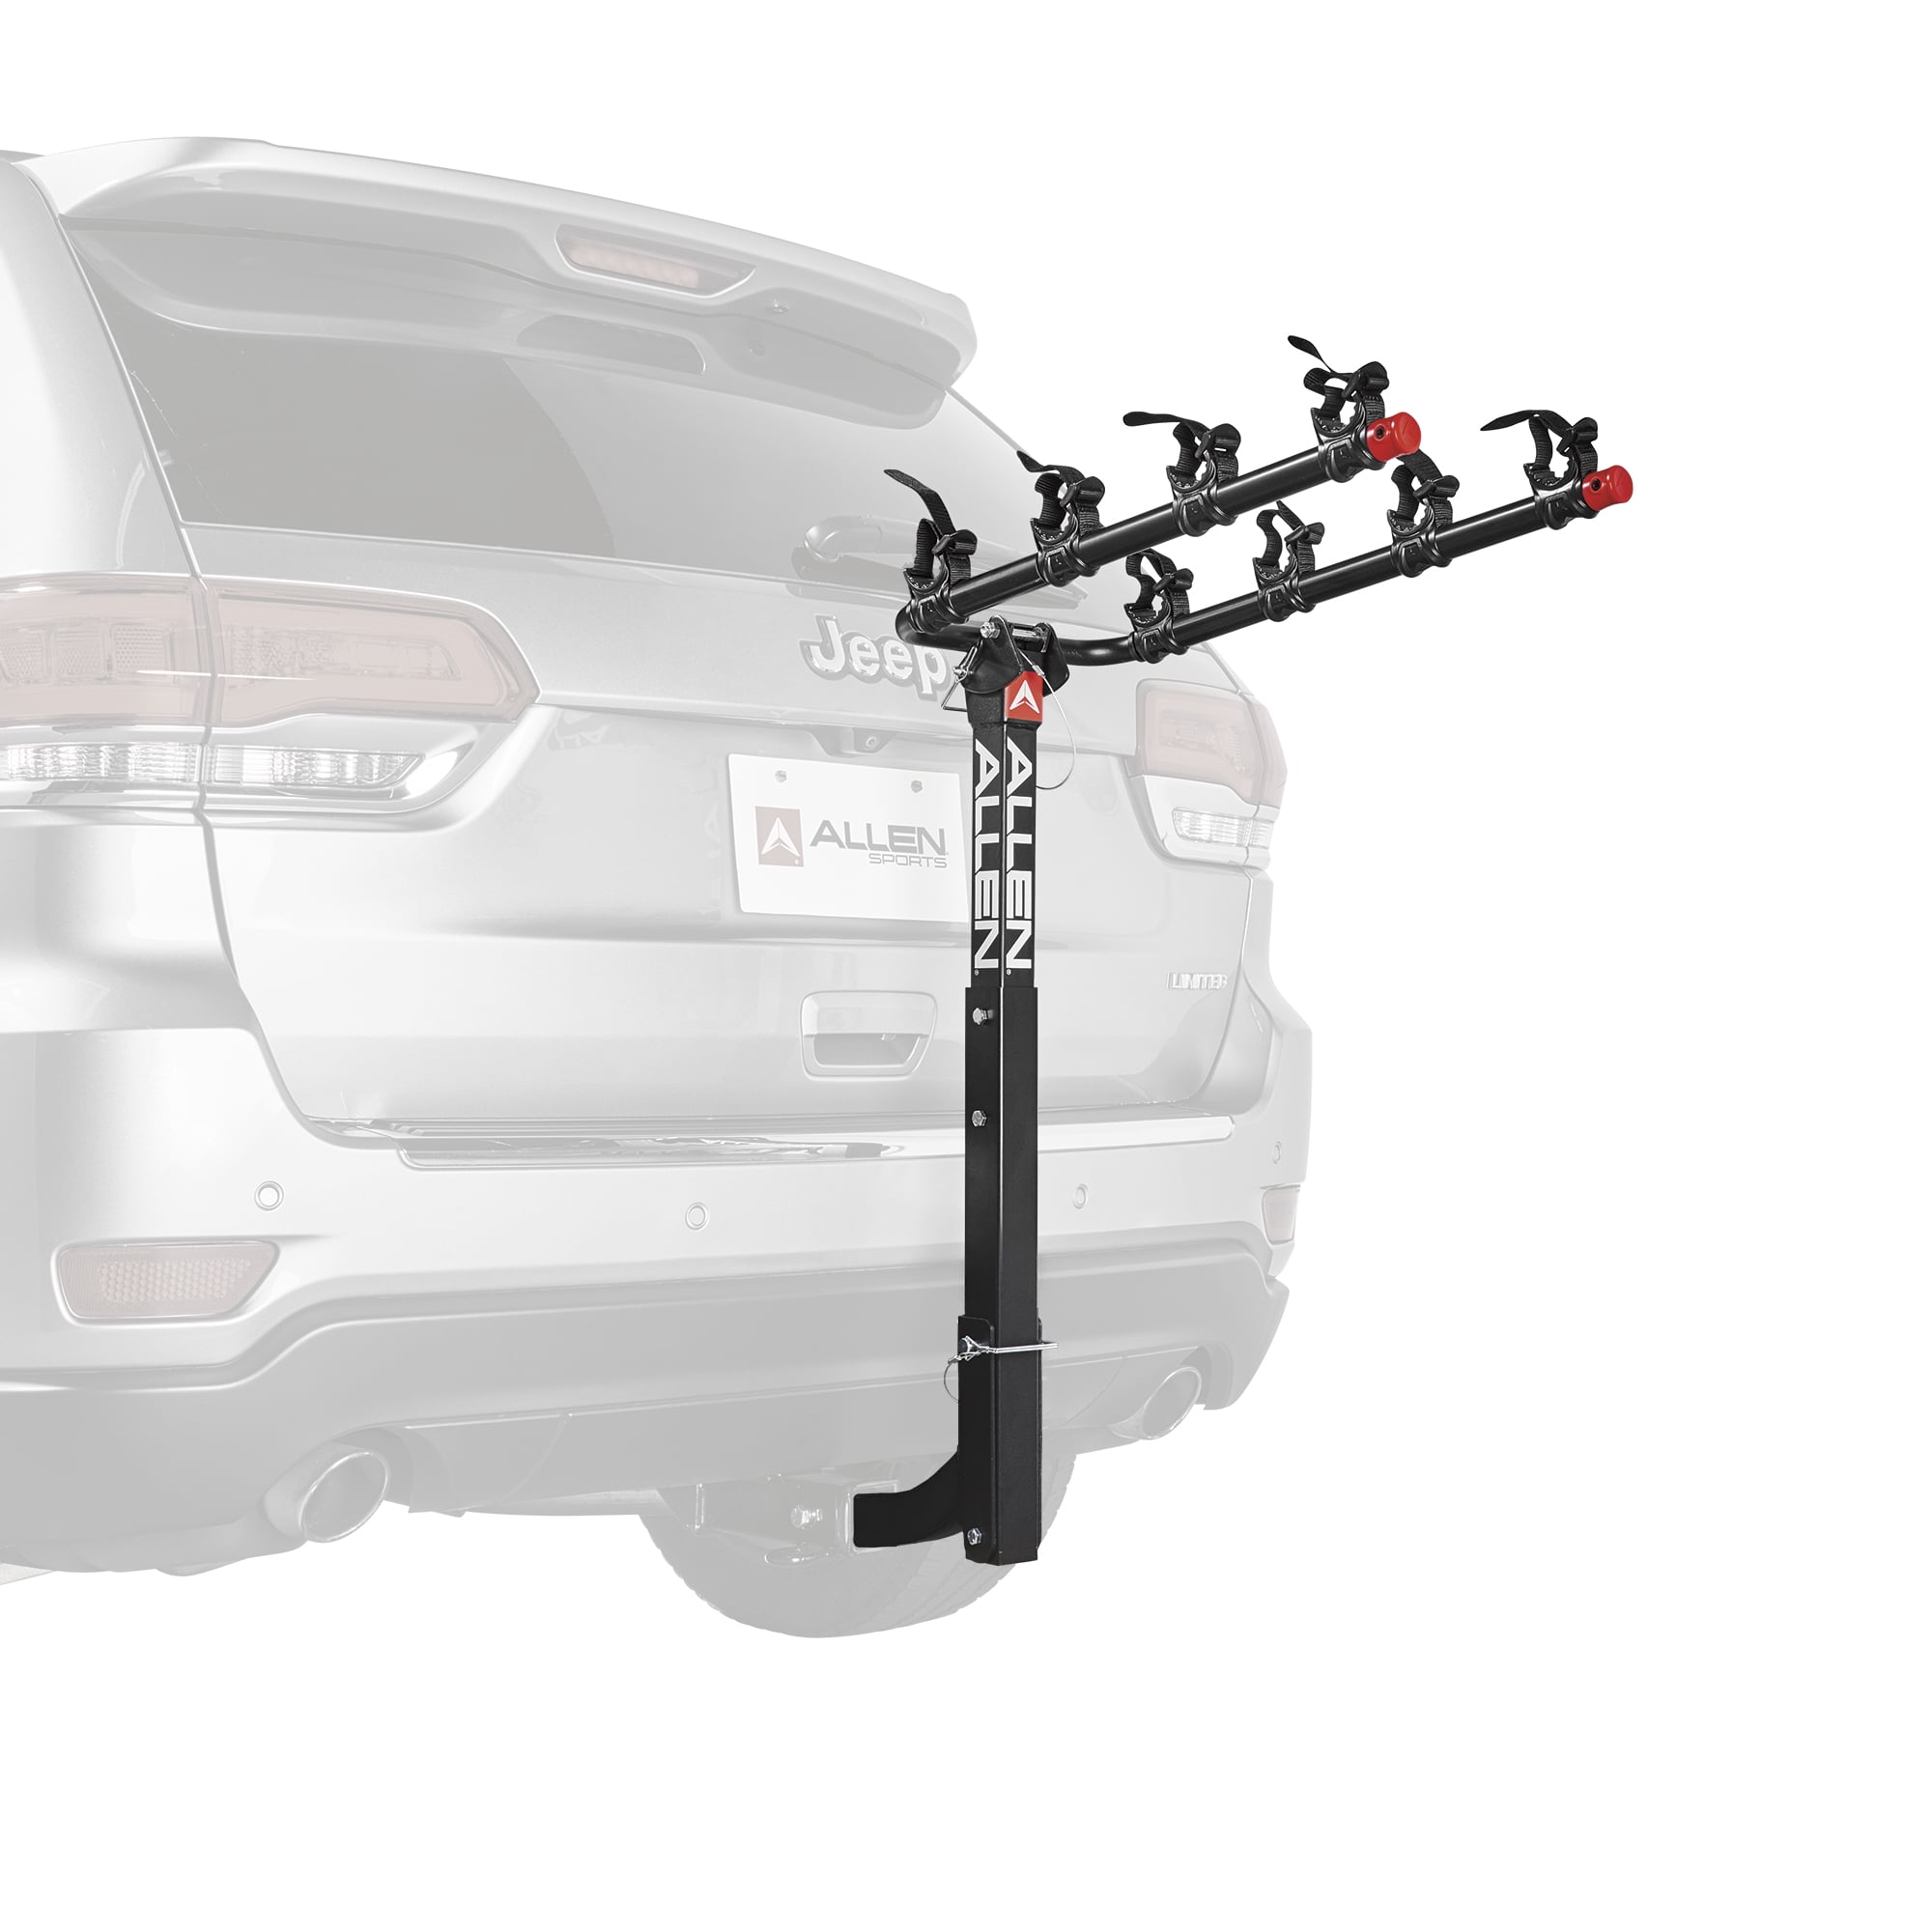 RACK 2 BIKE HITCH MOUNT Carrier Trailer Car Truck SUV Receiver Bicycle Transport 